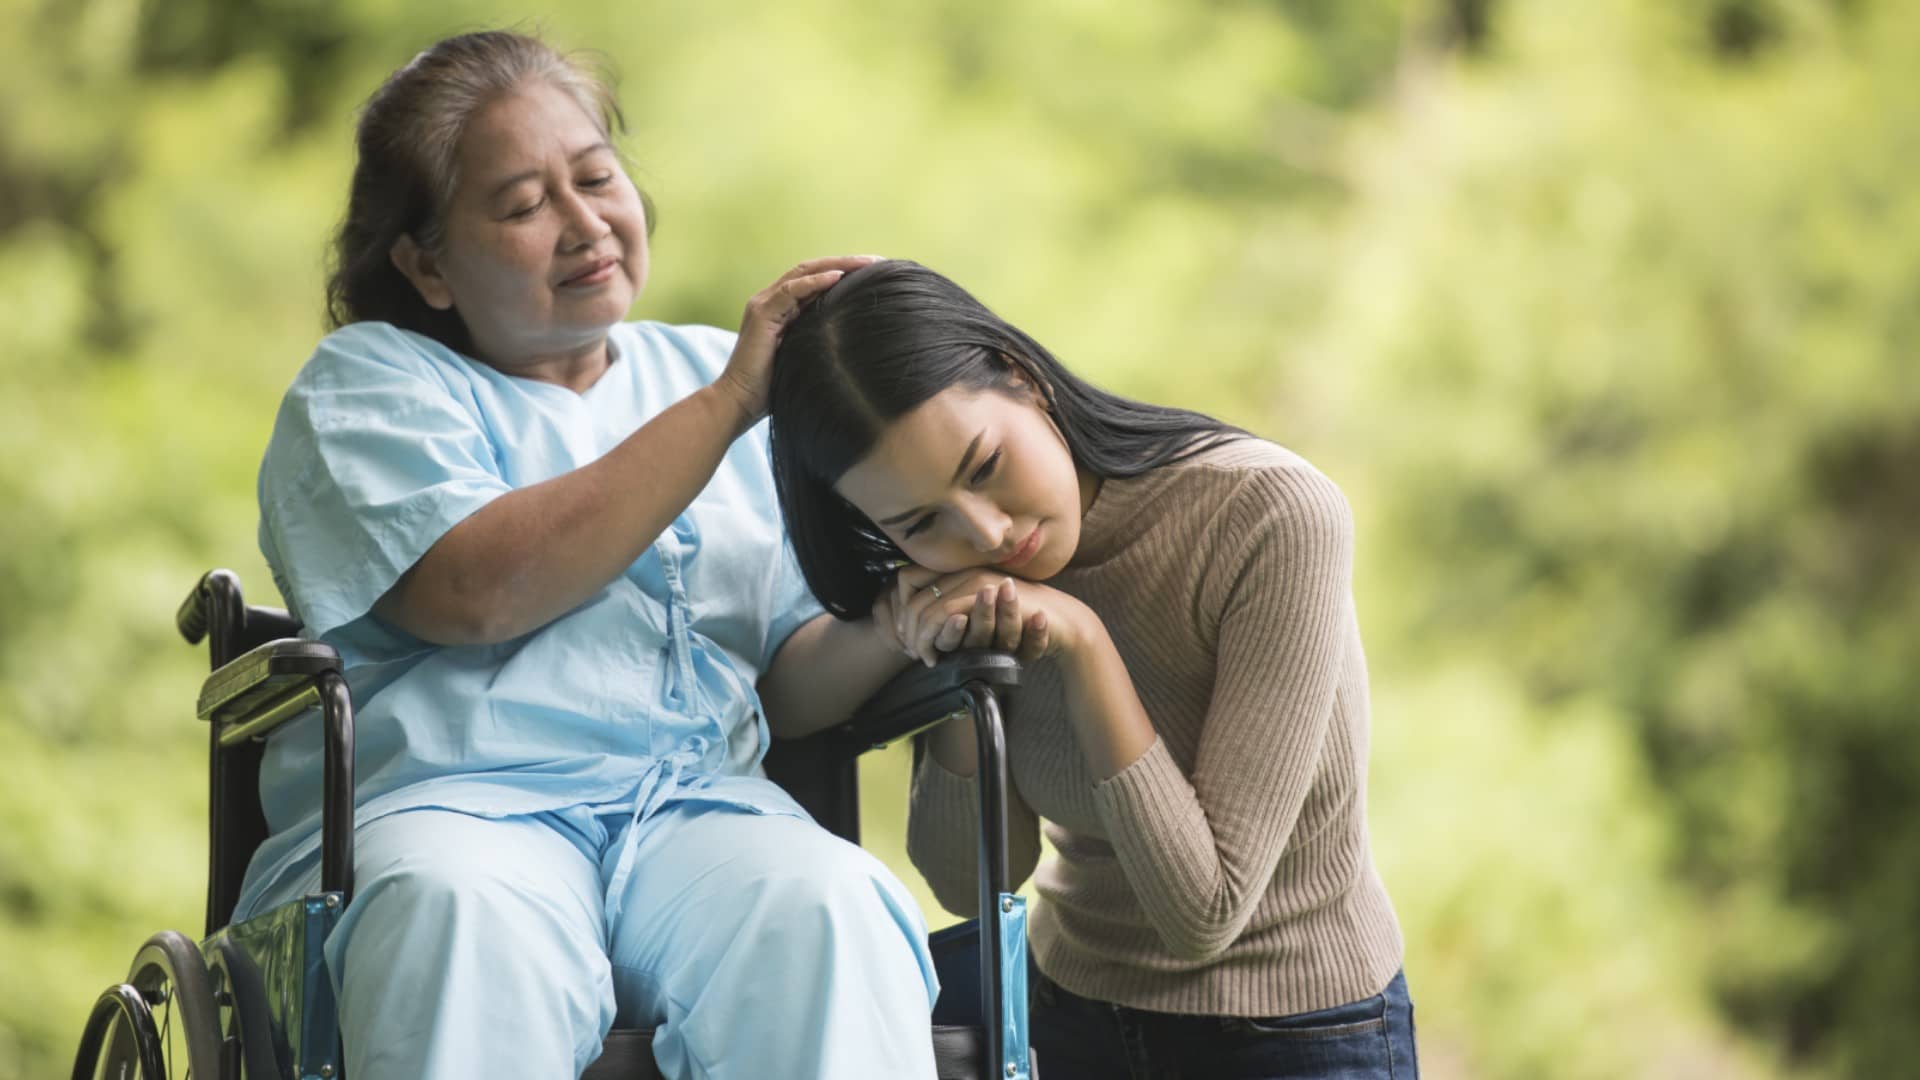 Caregiver Burnout: What It Is, How to Recognize The Signs, and Tips On How to Prevent It